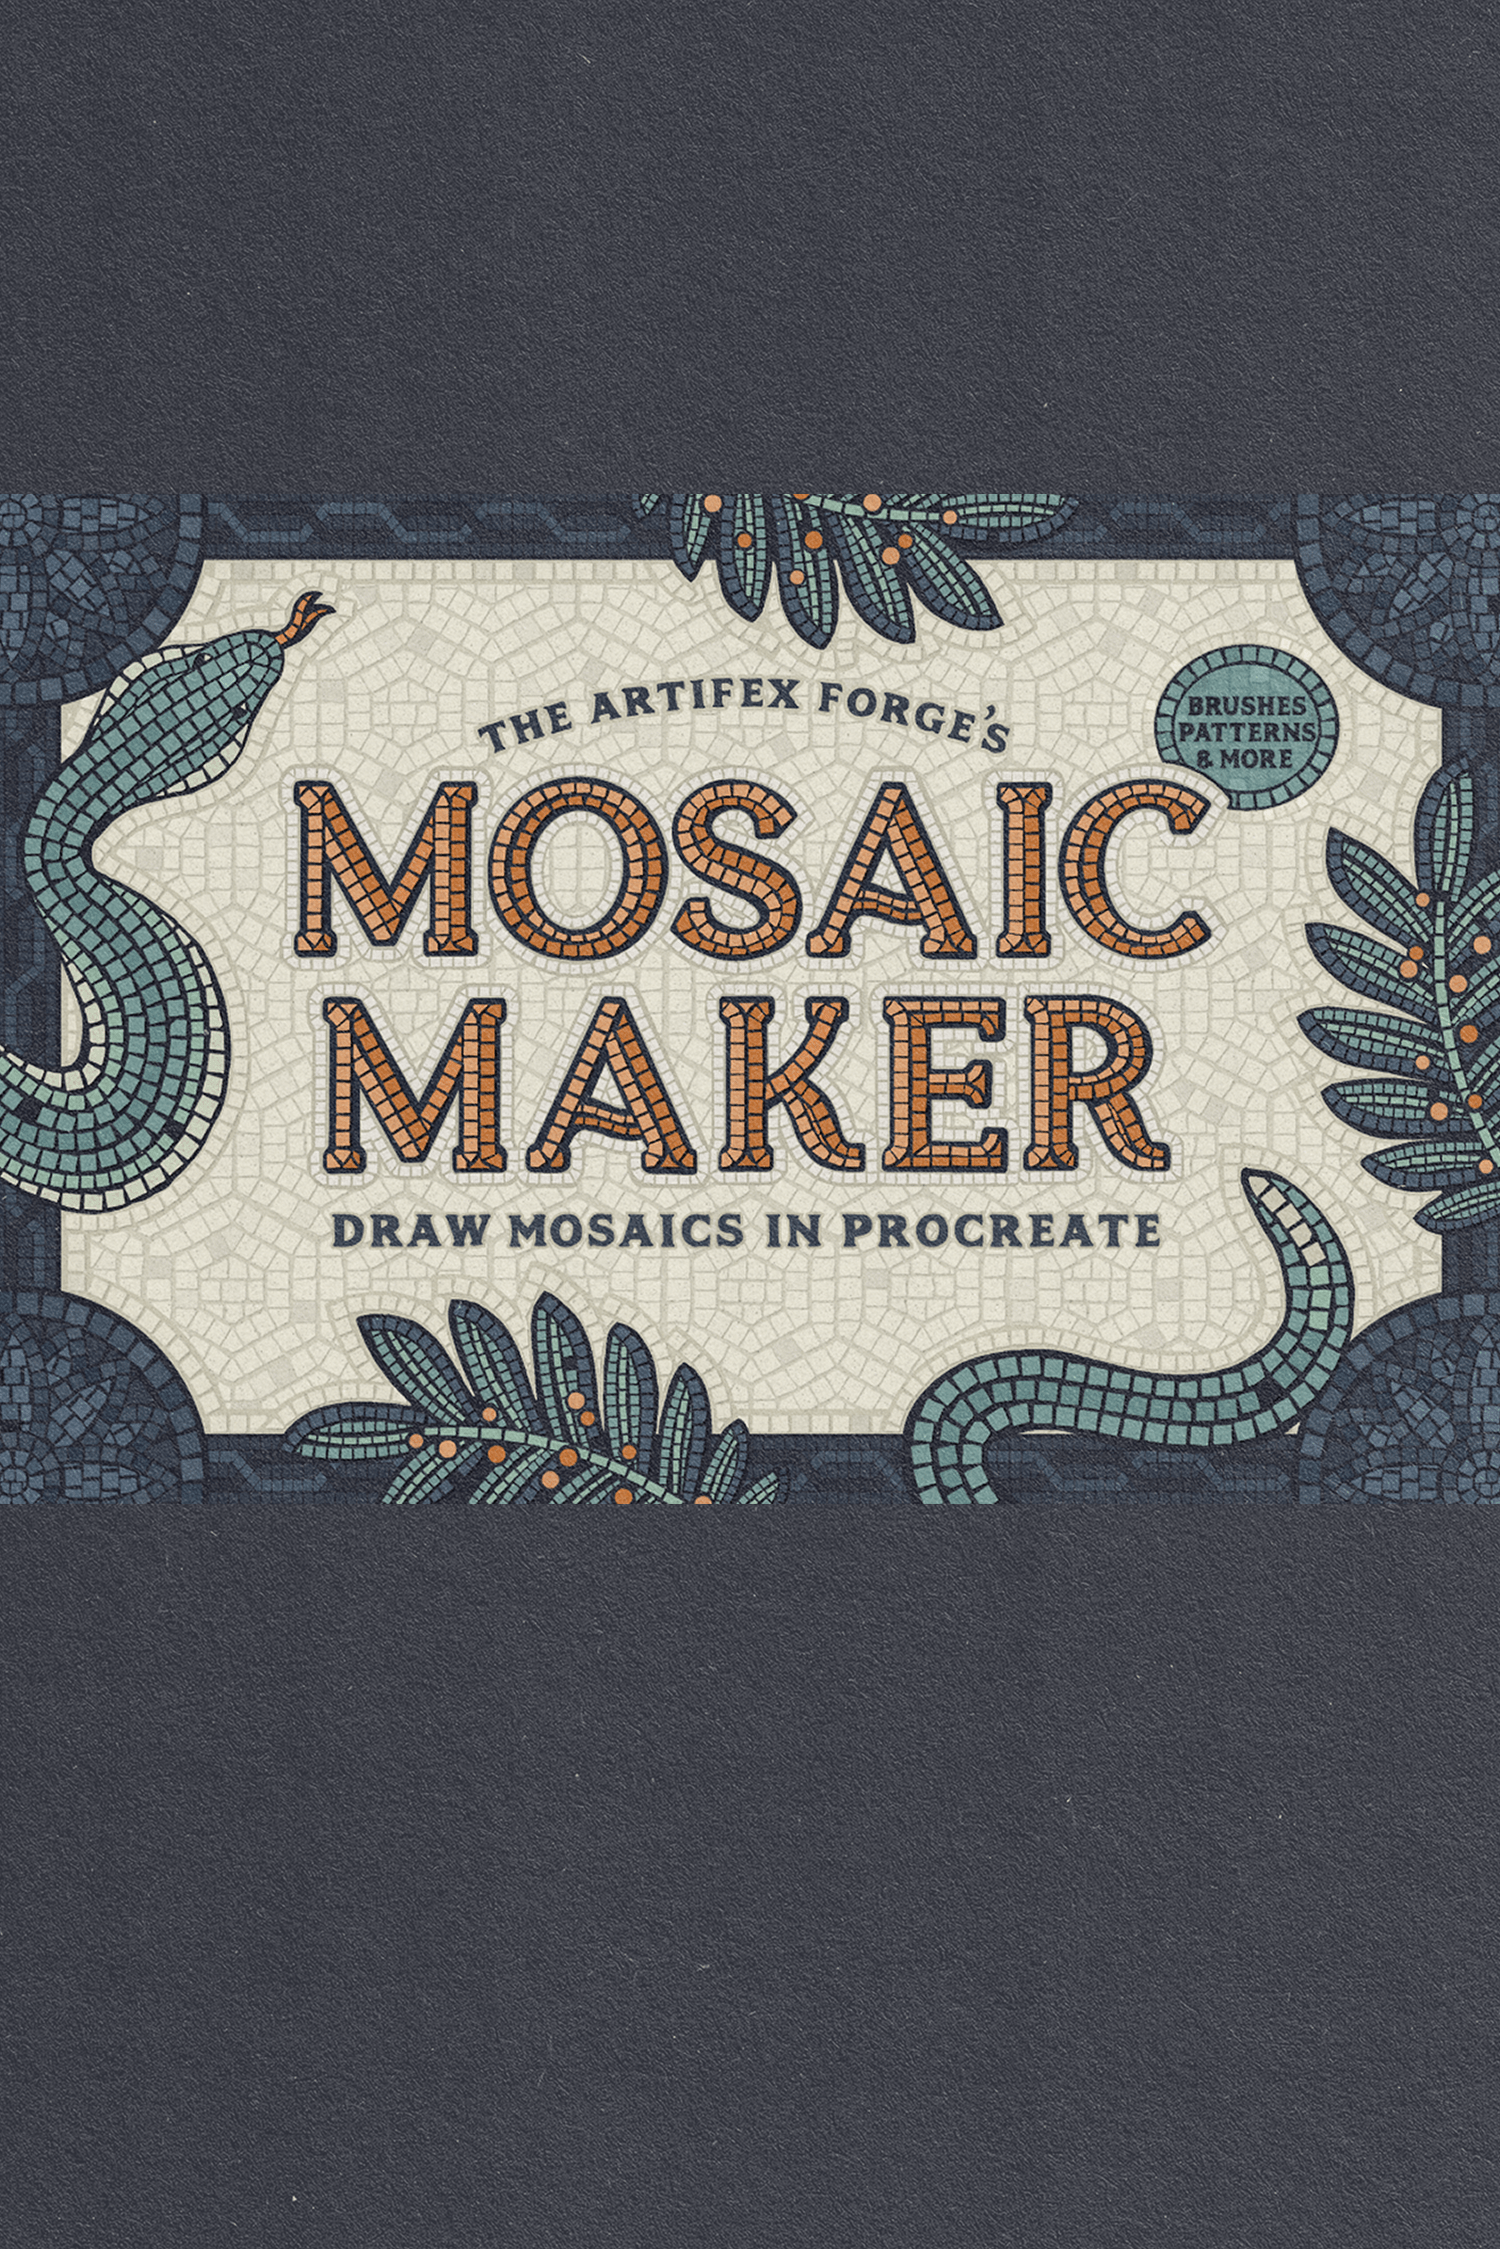 Mosaic Maker Toolkit by Artifex Forge